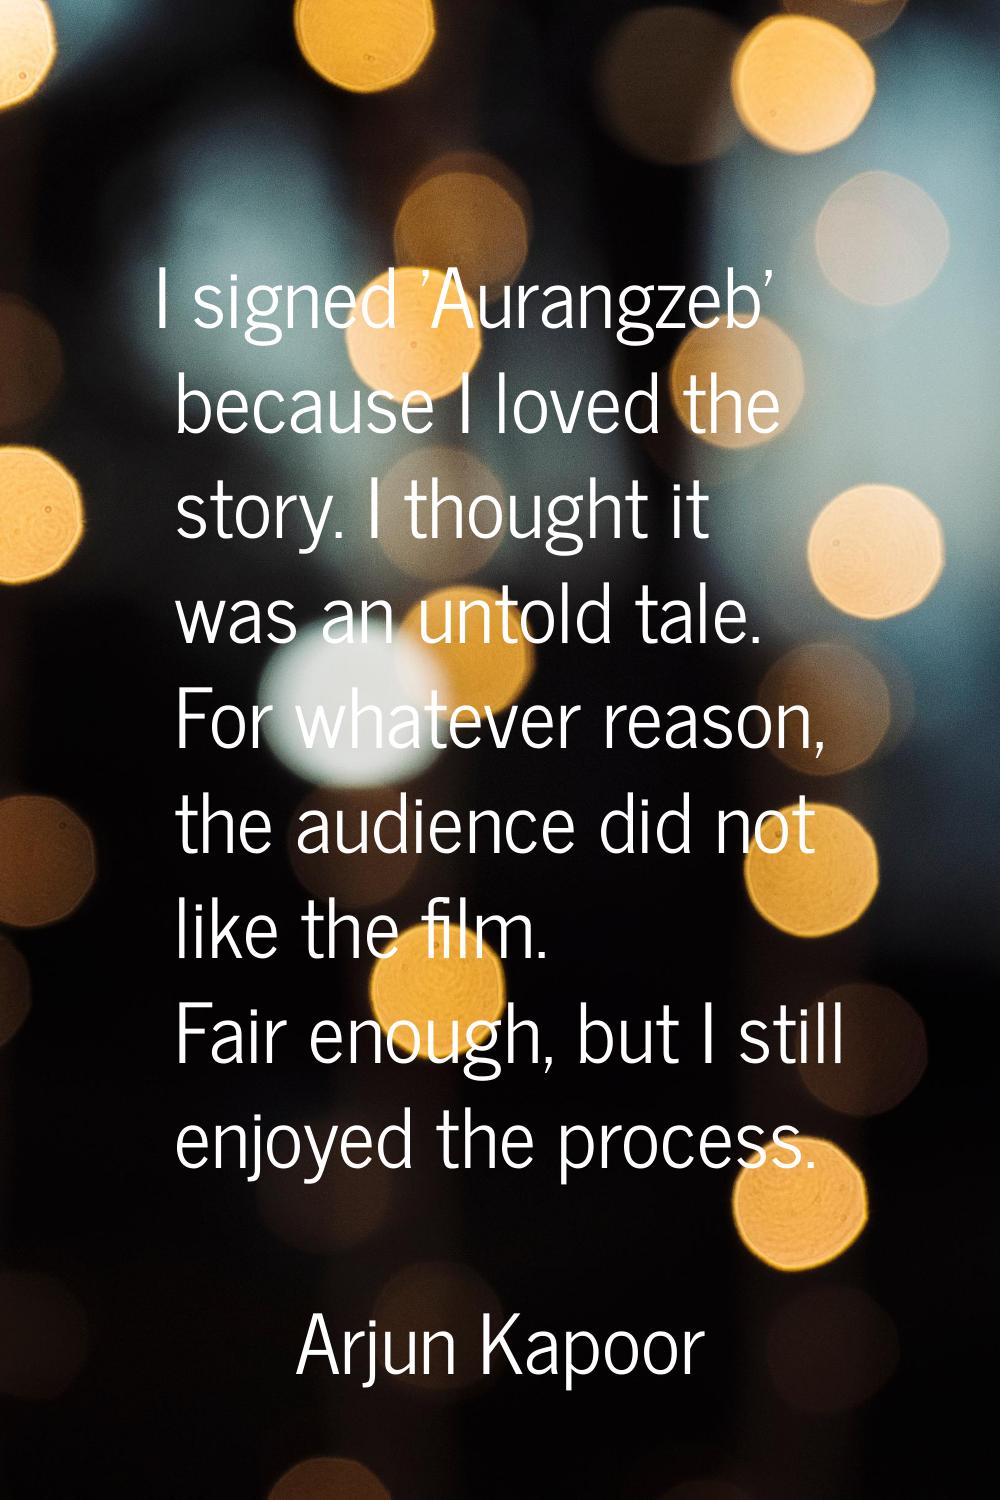 I signed 'Aurangzeb' because I loved the story. I thought it was an untold tale. For whatever reaso